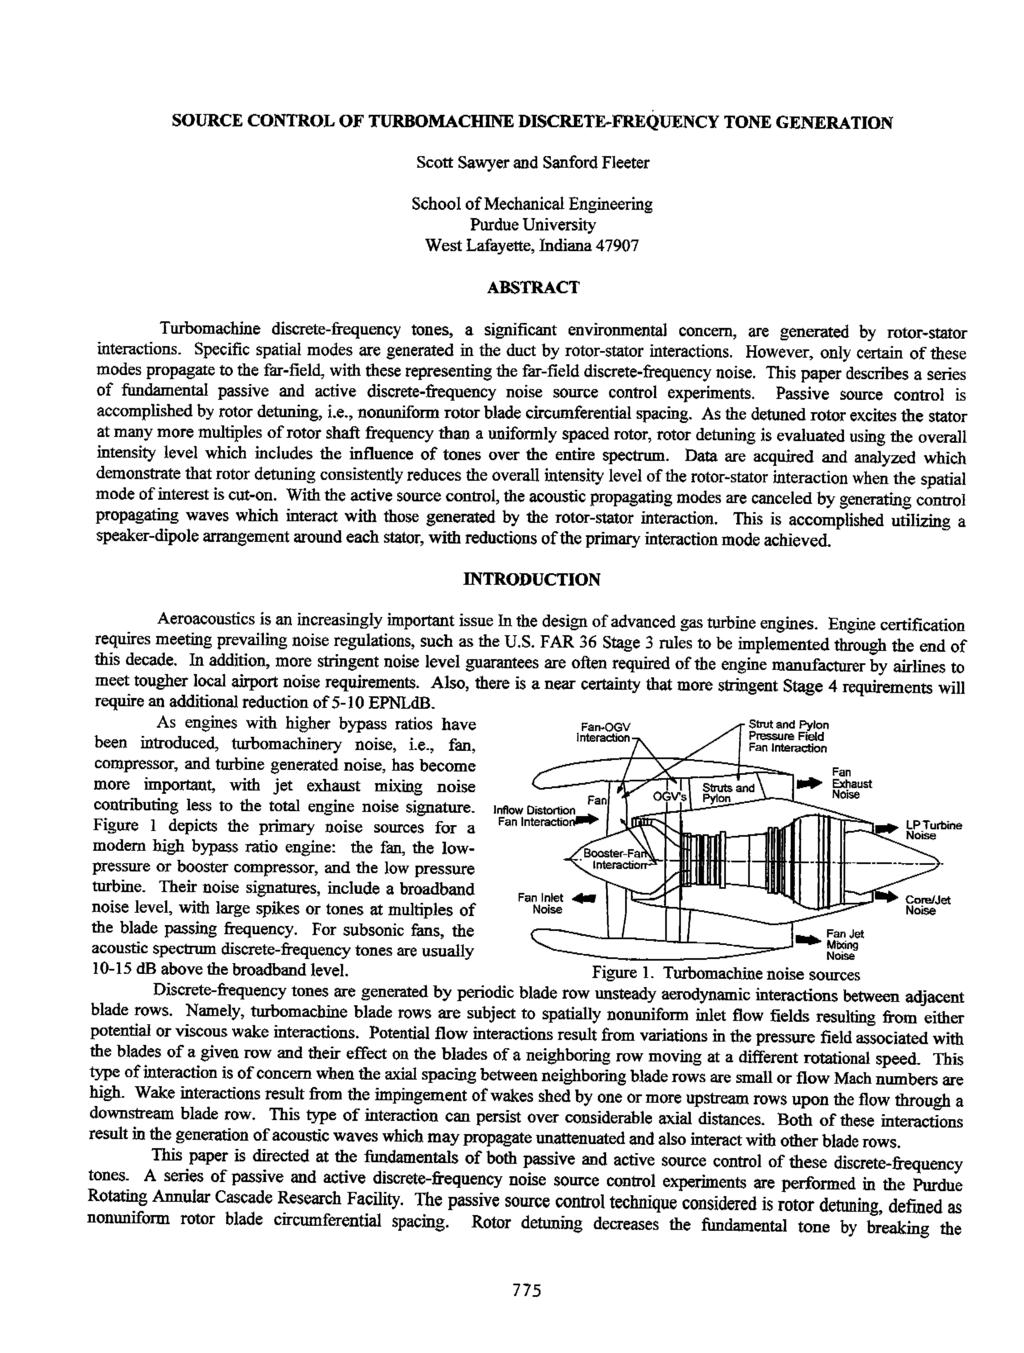 SOURCE CONTROL OF TURBOMACHINE DISCRETEPFREQUENCY TONE GENERATION Scott Sawyer and Sanford Fleeter School of Mechanical Engineering West Lafayette, Indiana 47907 ABSTRACT Turbomachine